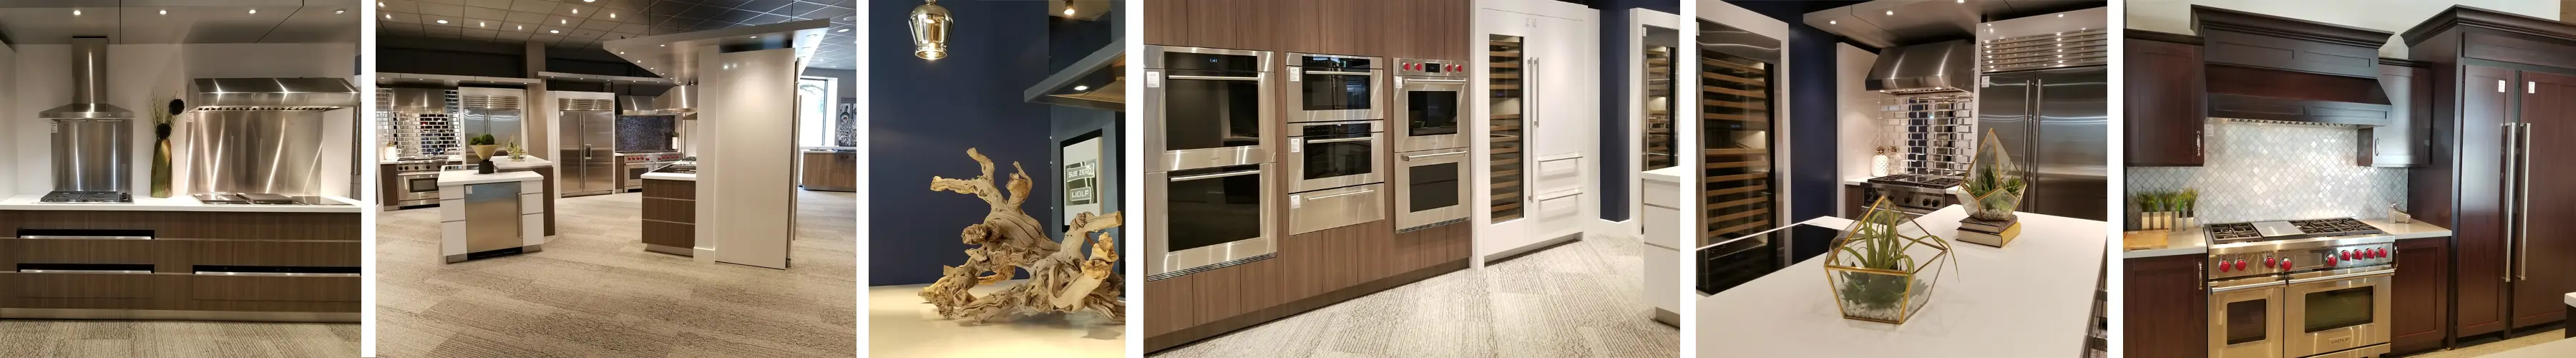 Sub-Zero, Wolf, and Cove Appliances in The Living Kitchen at Capital Distributing Dallas TX 